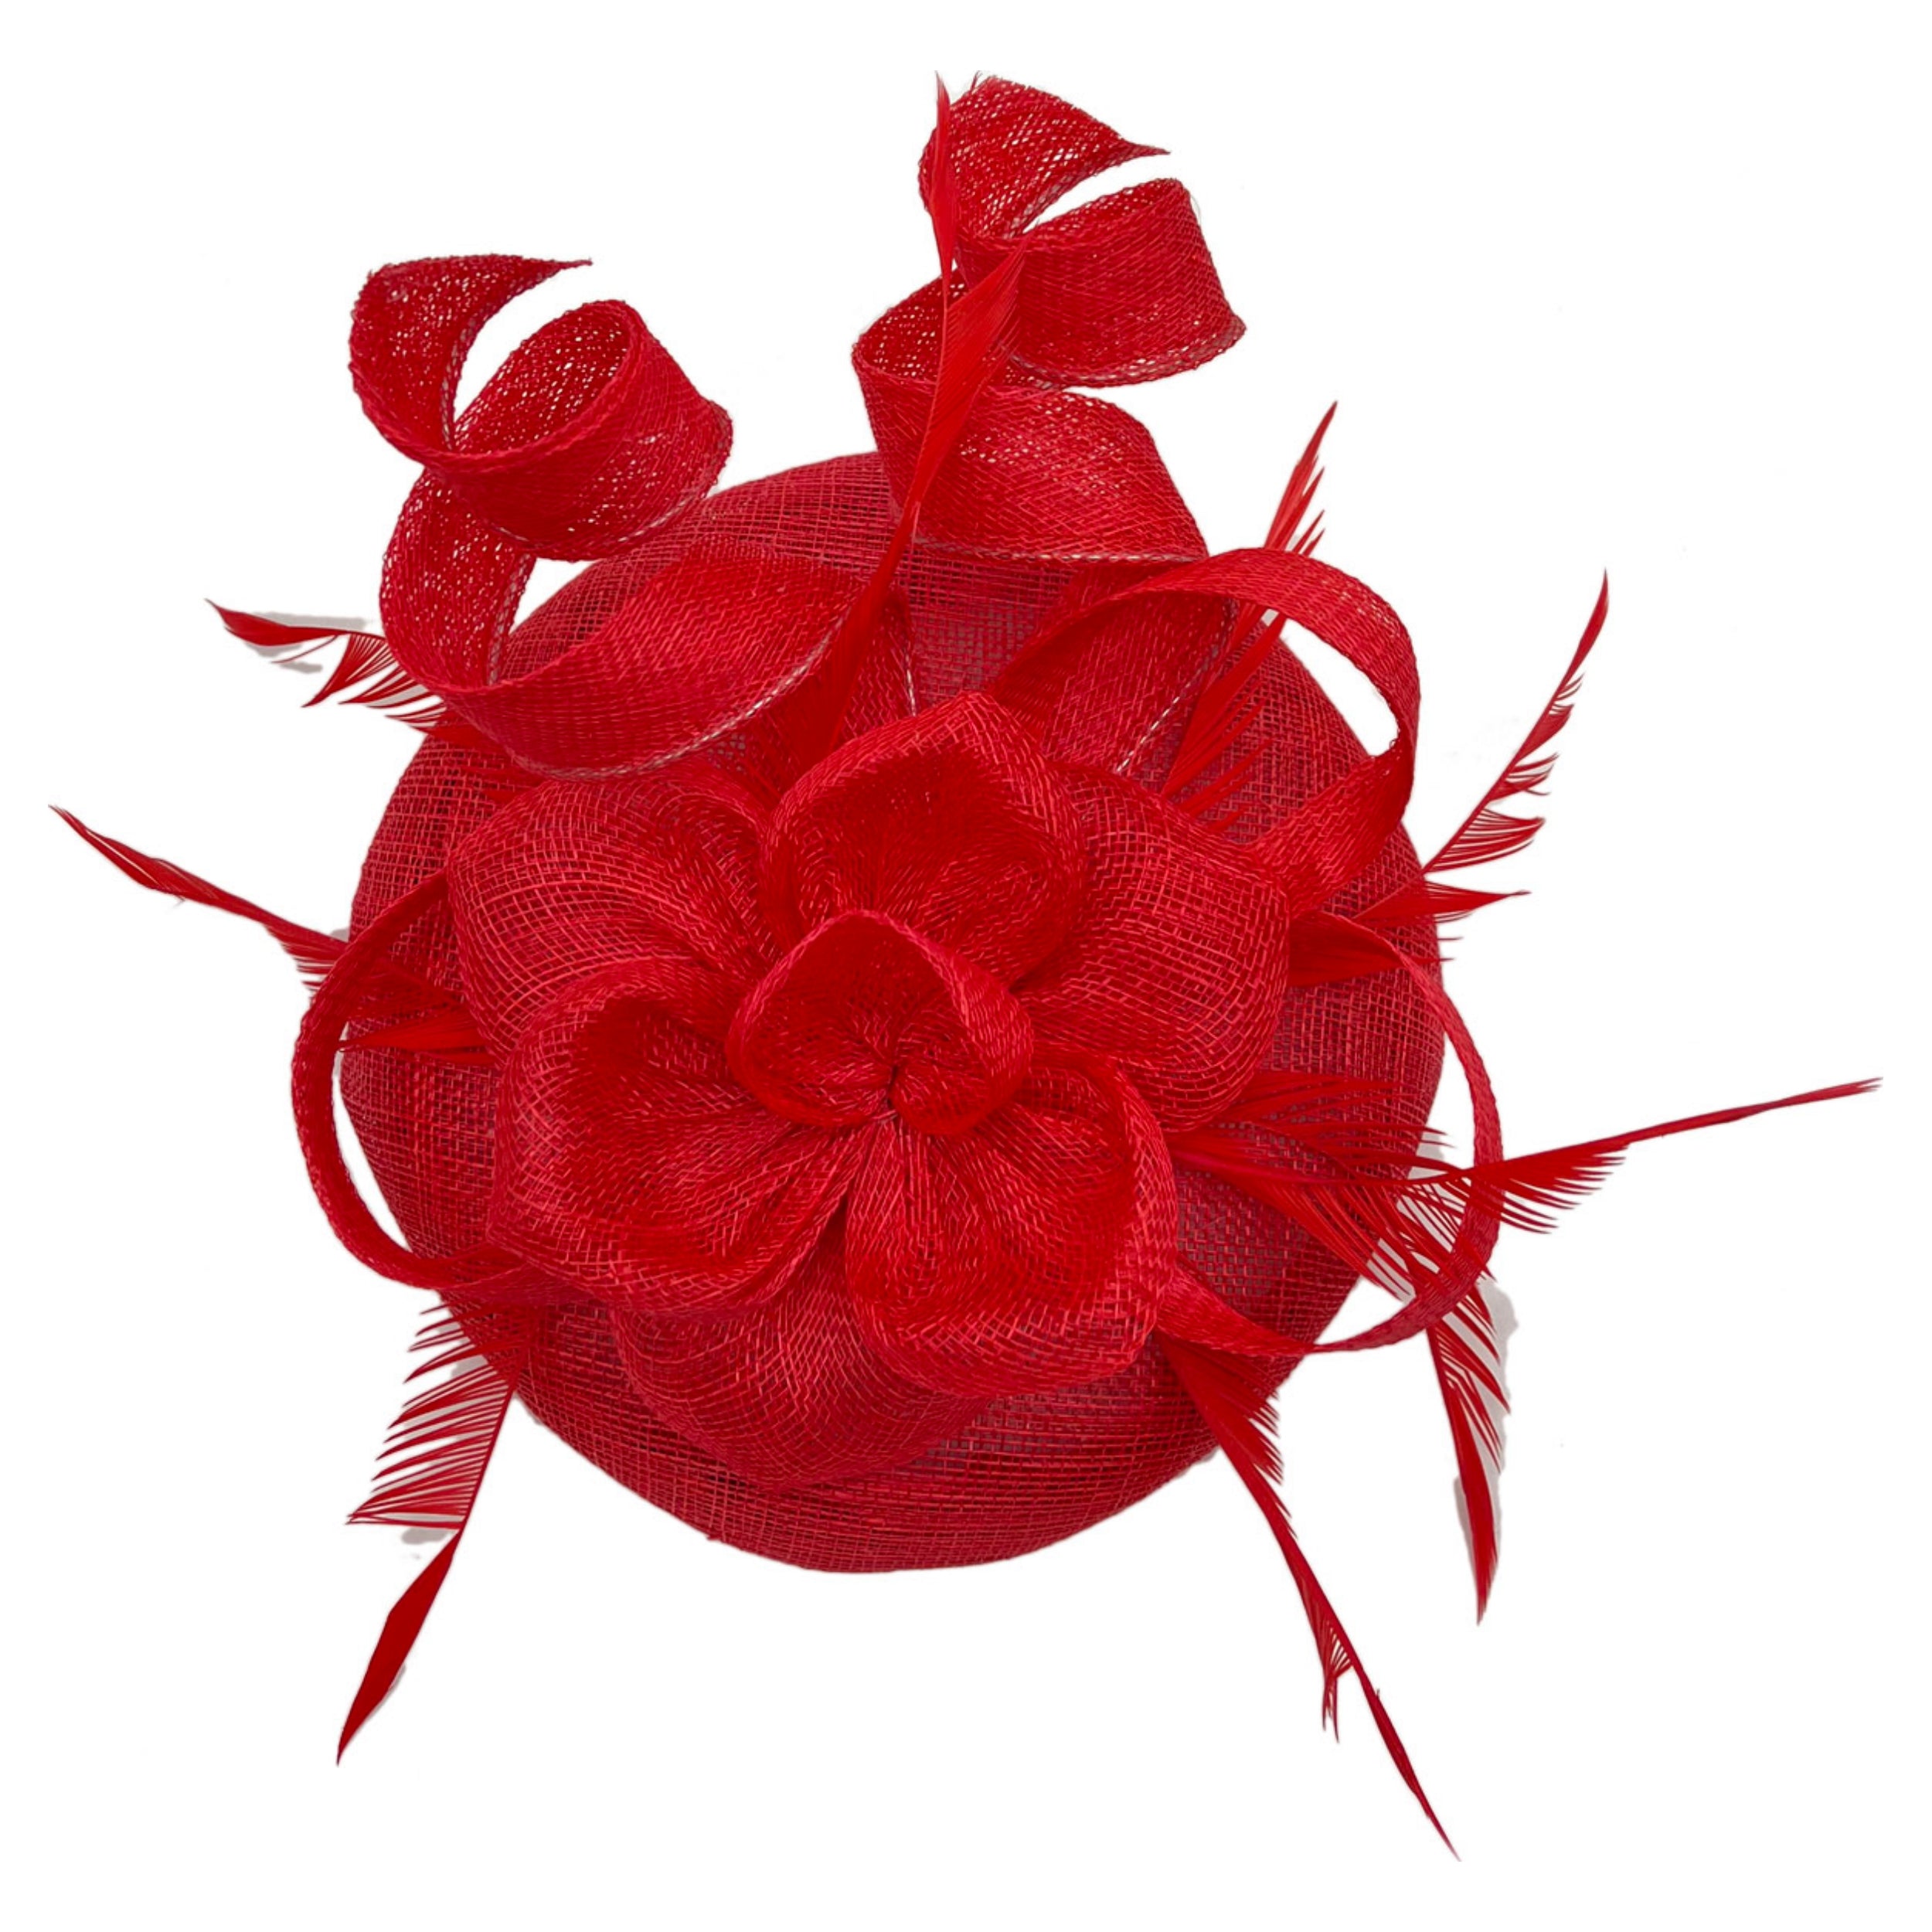 Round Base Sinamay Floral Fascinator with Curled Straps